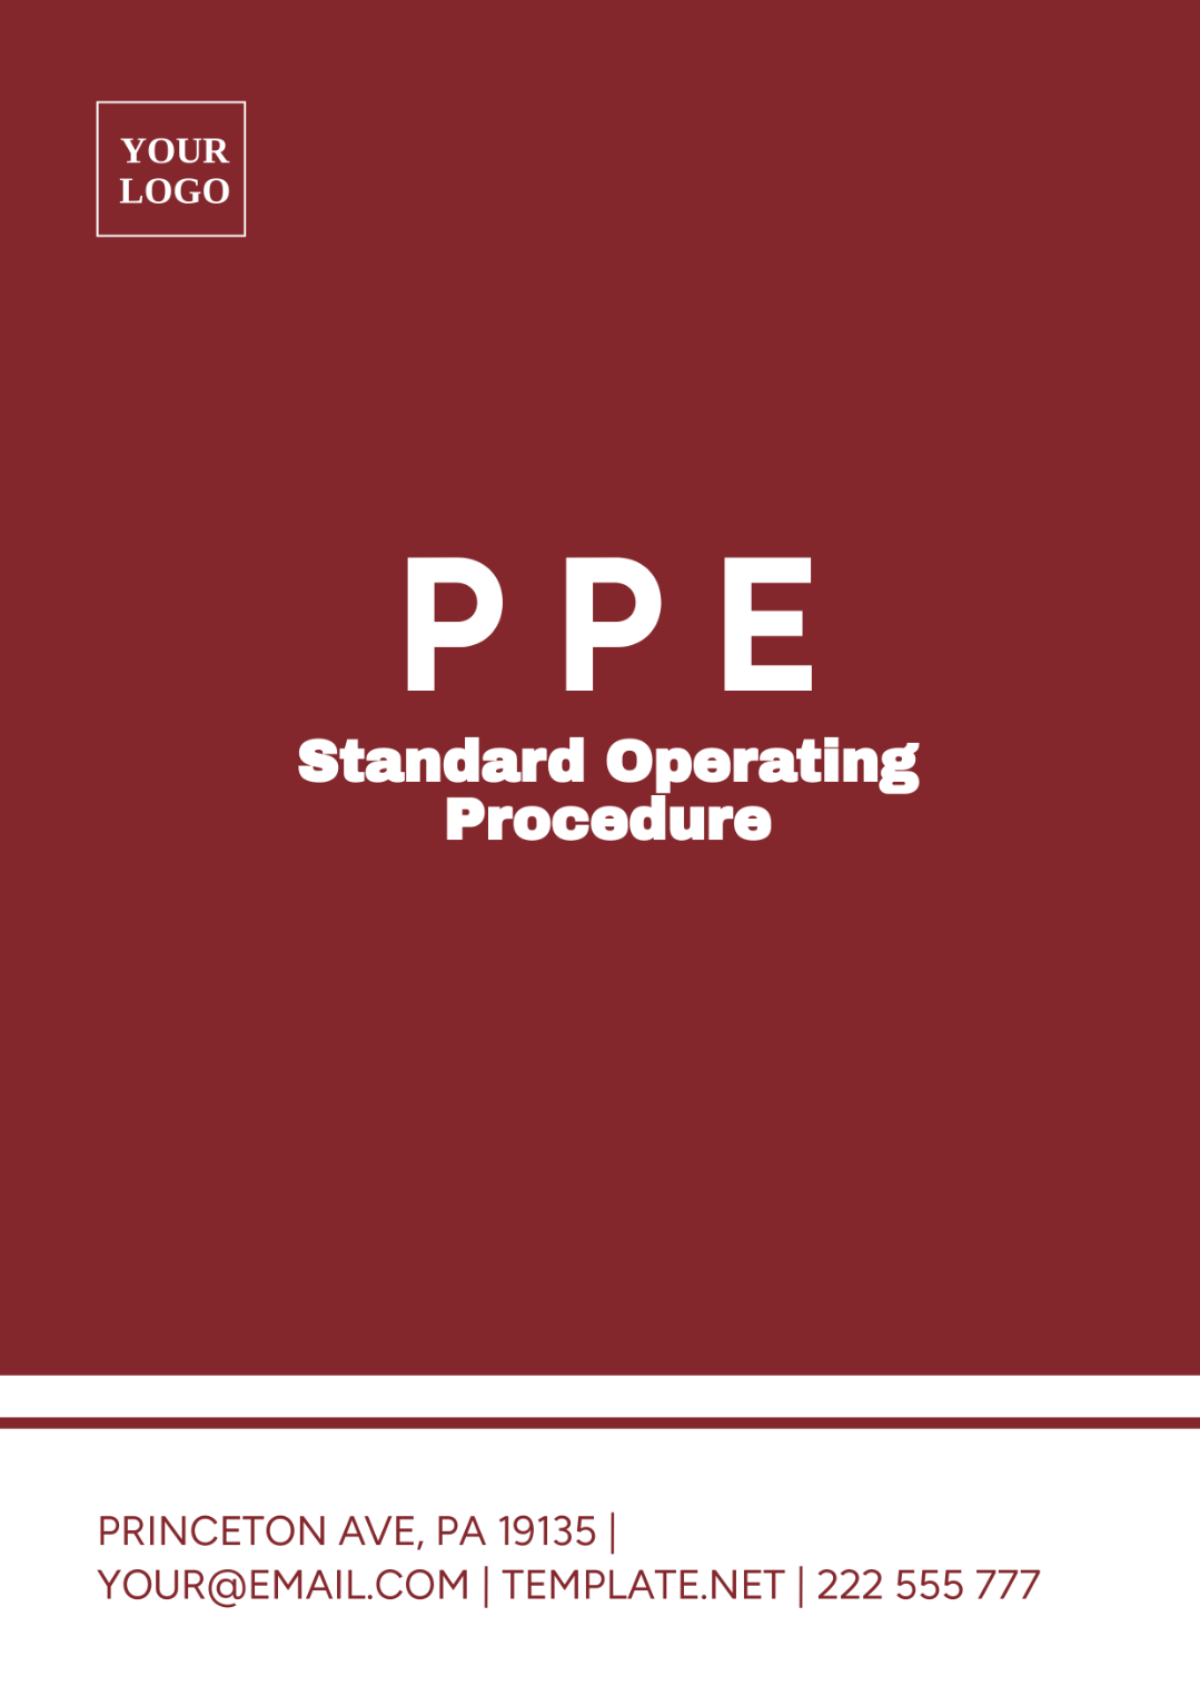 PPE SOP Template